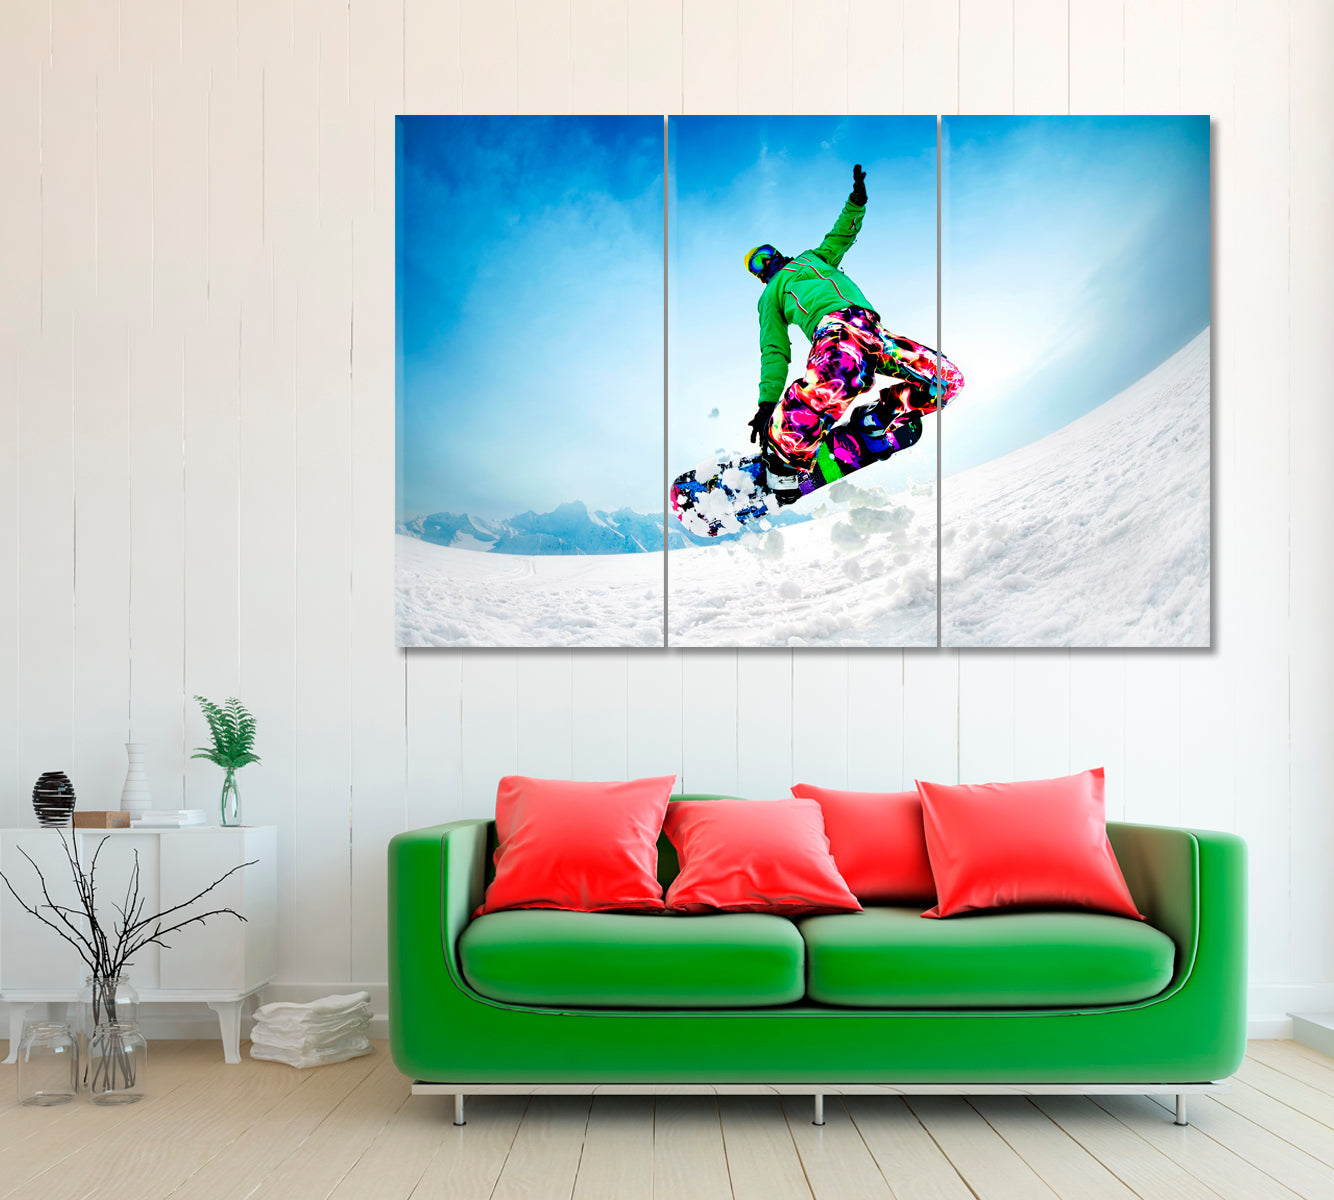 Snowboarder Canvas Print ArtLexy 3 Panels 36"x24" inches 